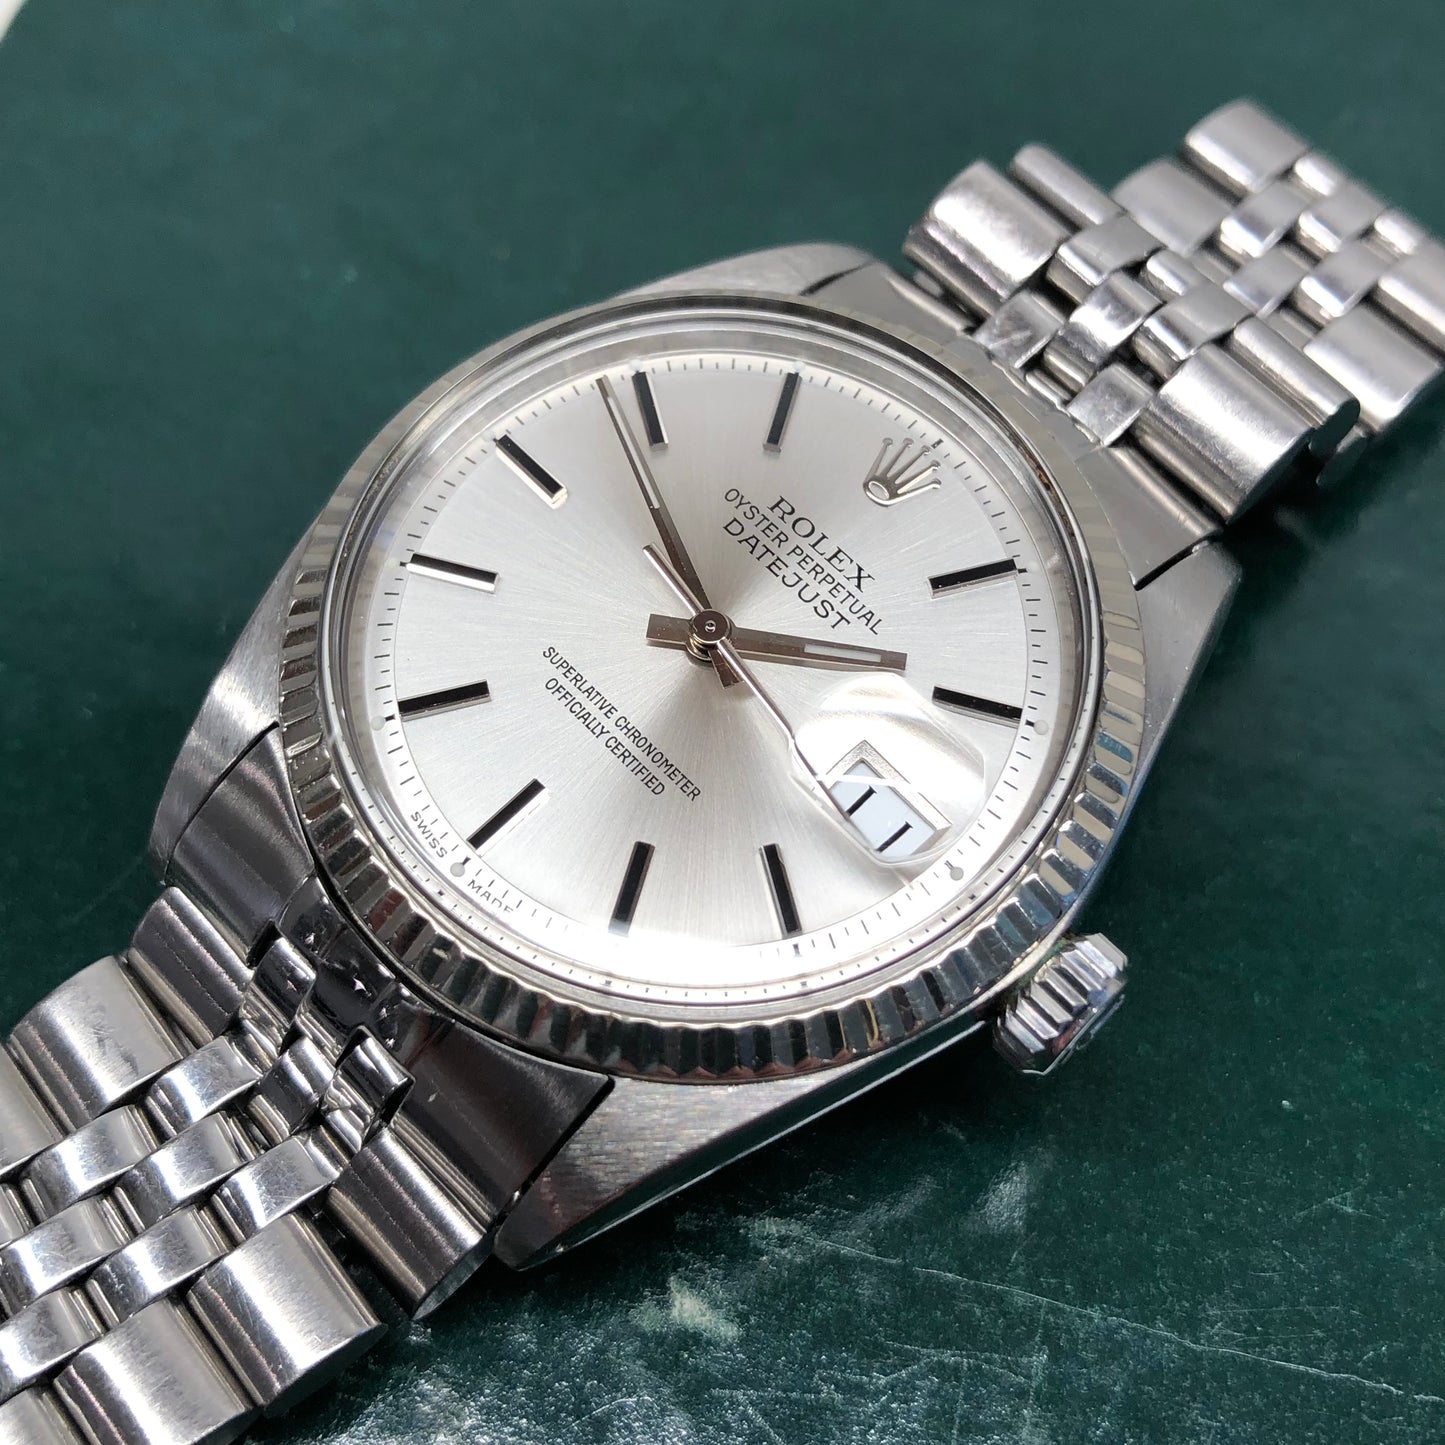 1964 Rolex Datejust 1601 Fluted Stainless Steel Silver Dial Jubilee Automatic Wristwatch - HASHTAGWATCHCO